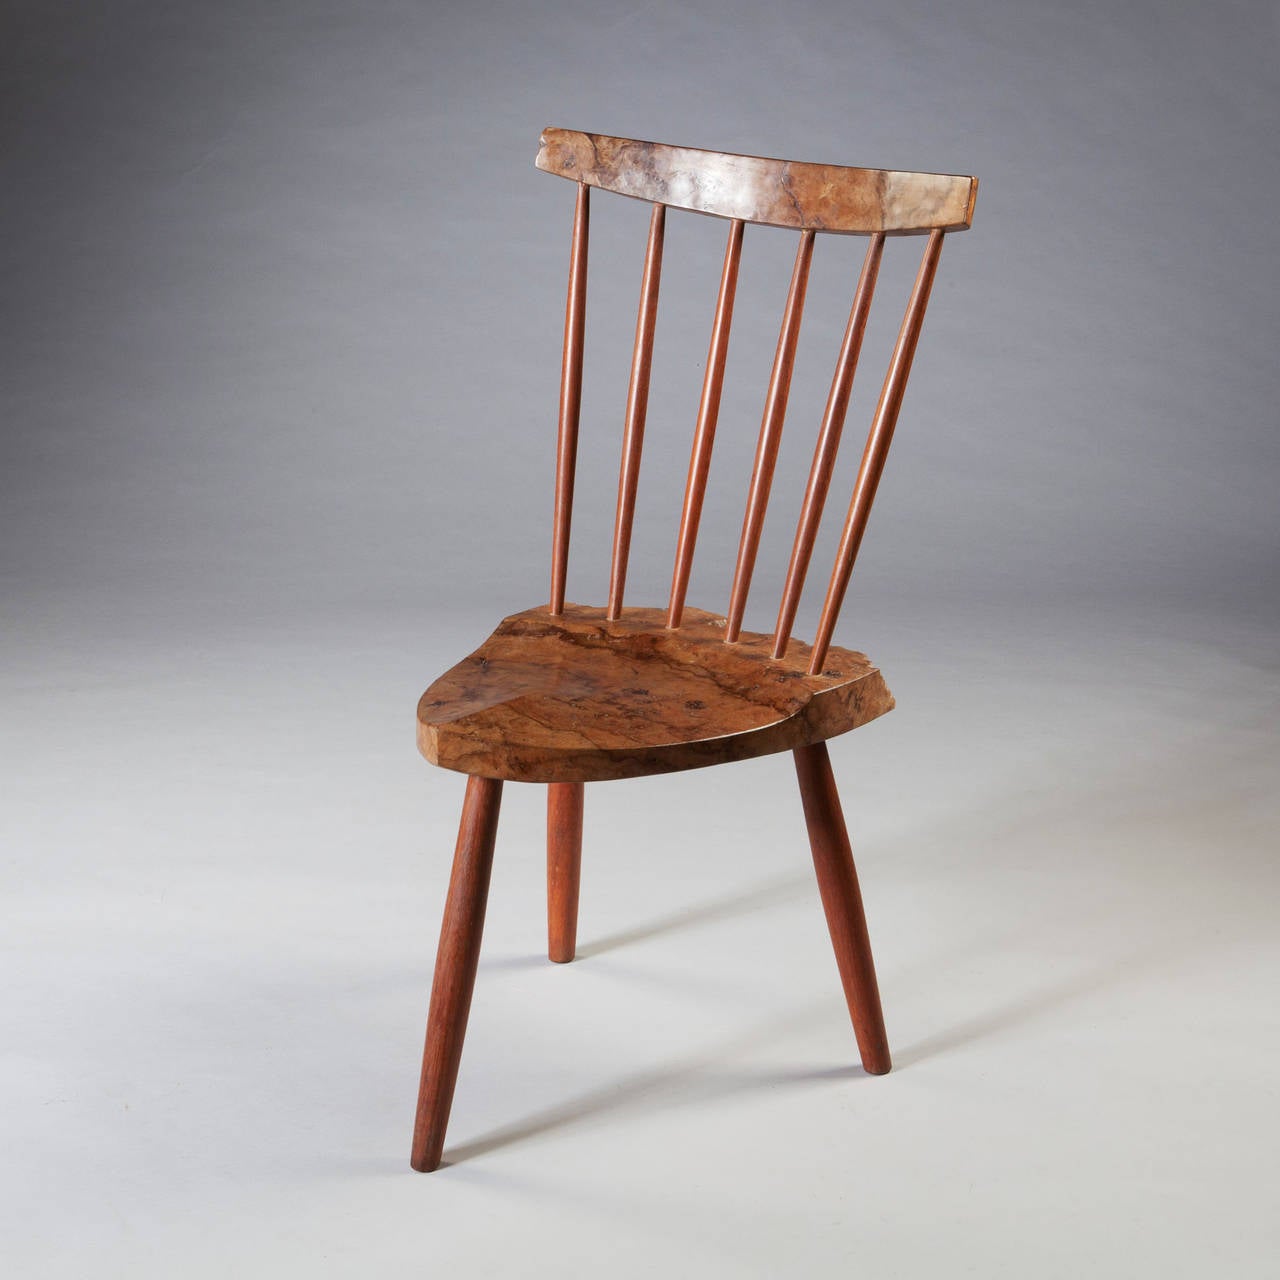 An Unusual Pair of Burr Walnut Side Chairs, After George Nakashima 1